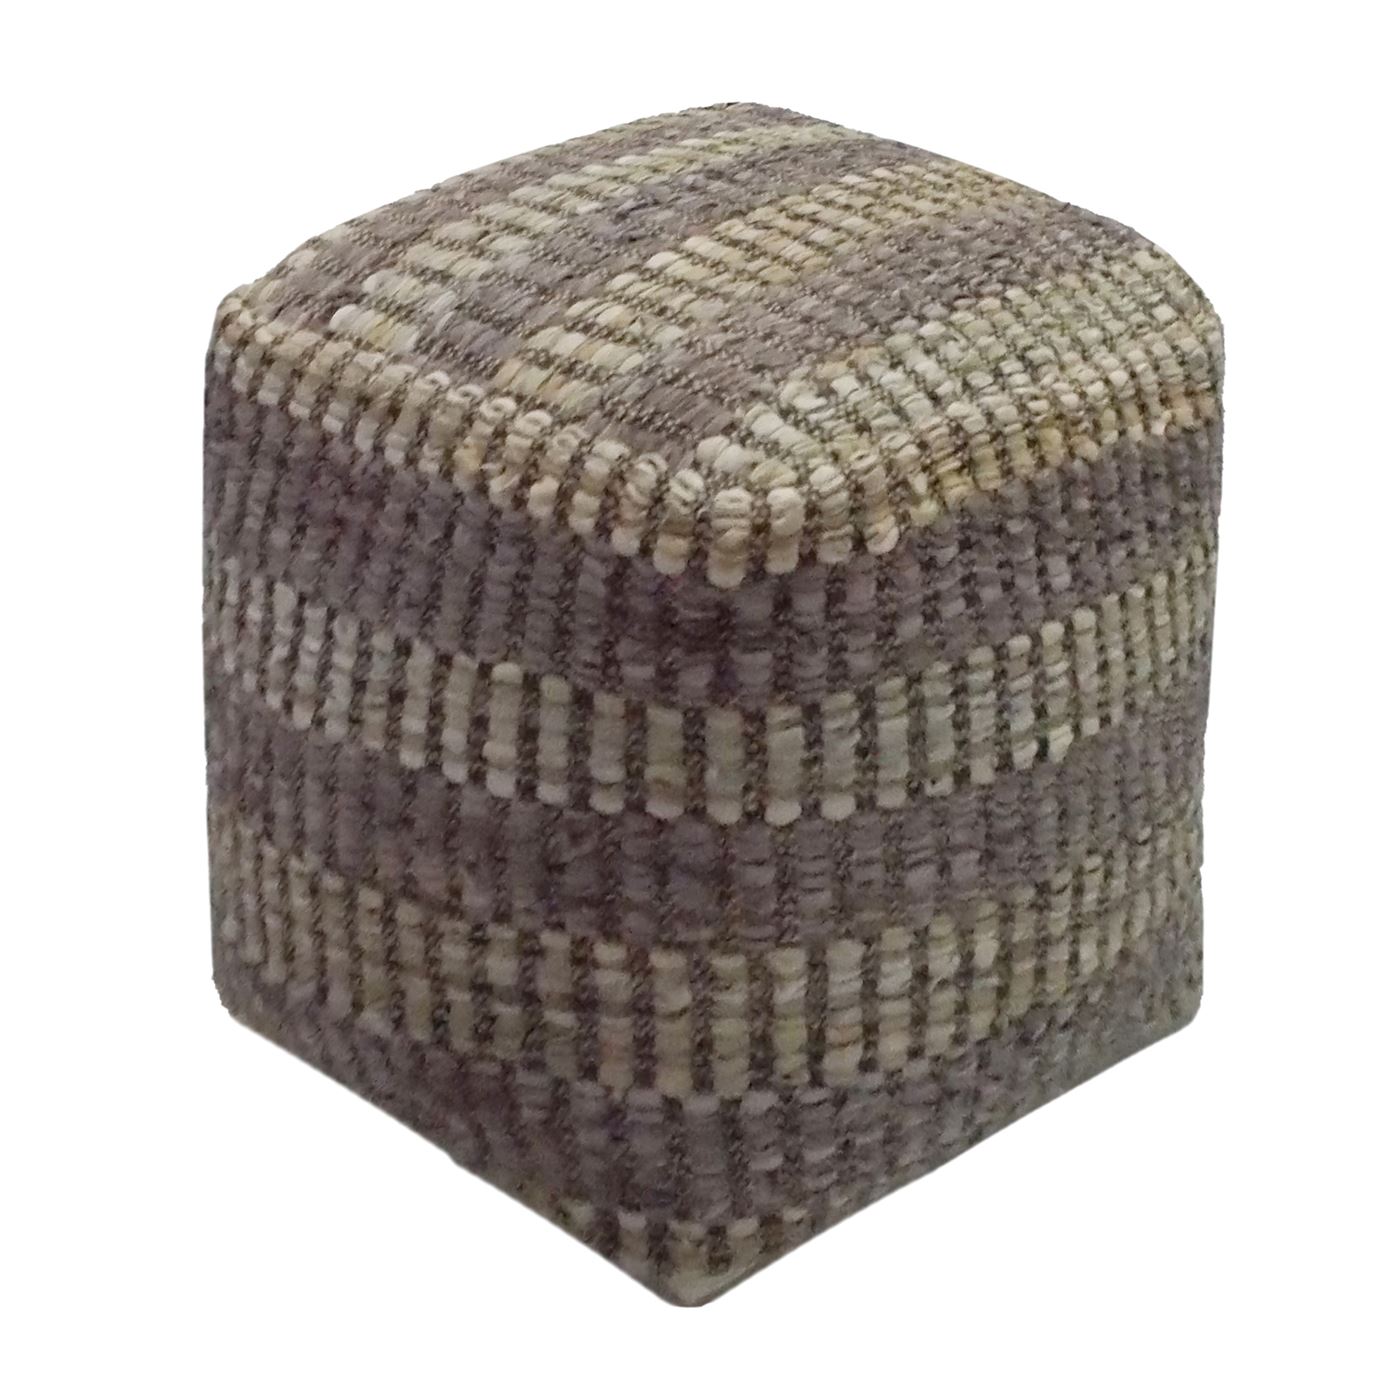 Cranley Pouf, Leather, Hemp, Taupe, Brown, Pitloom, Flat Weave